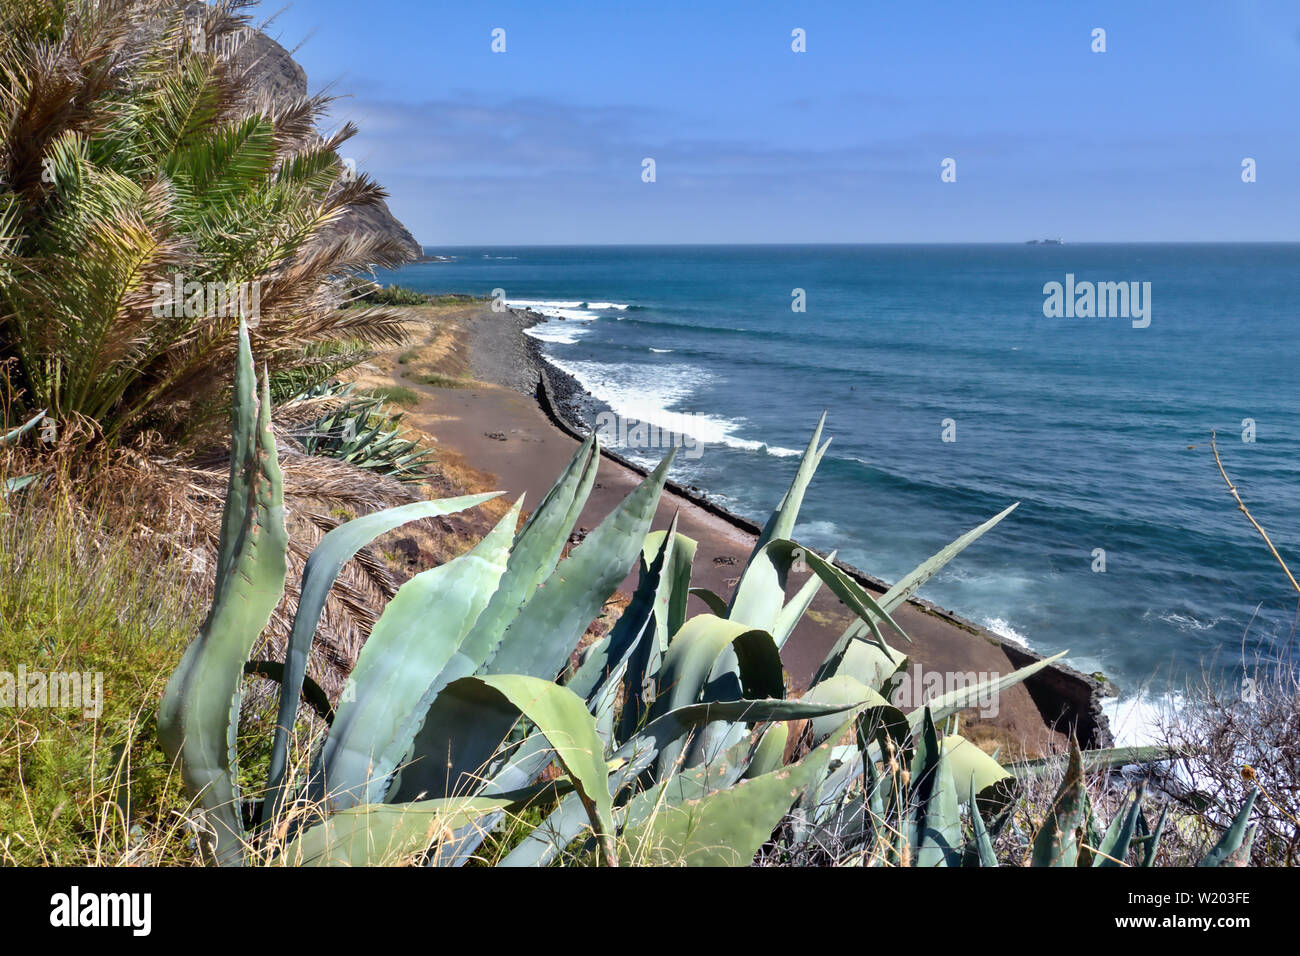 View over the black lava beach in Igueste on the Canary Island Tenerife. No people, in the foreground large agave plants, the Atlantic Ocean is dark b Stock Photo